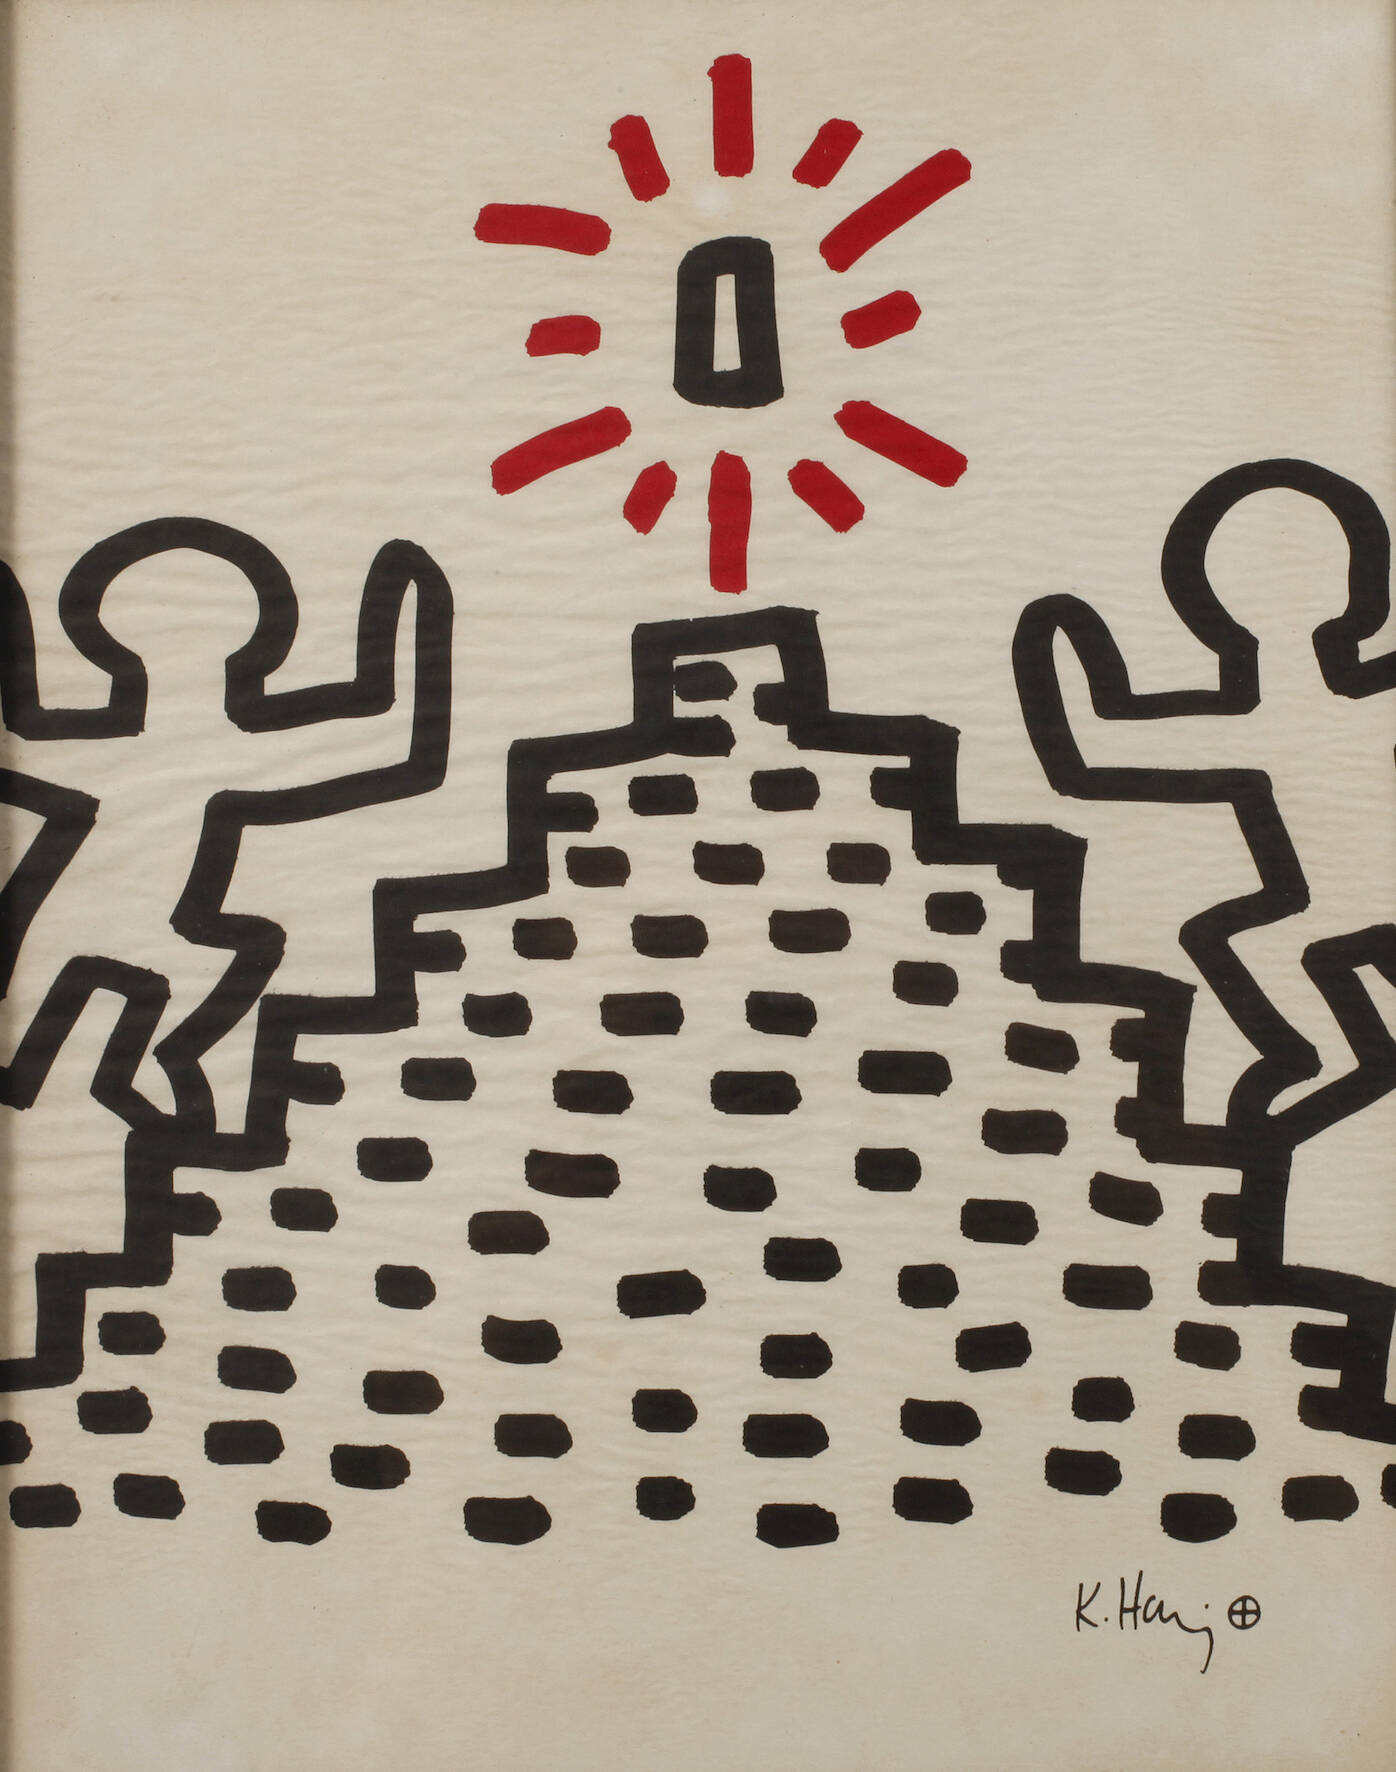 Keith Haring, up the stairs